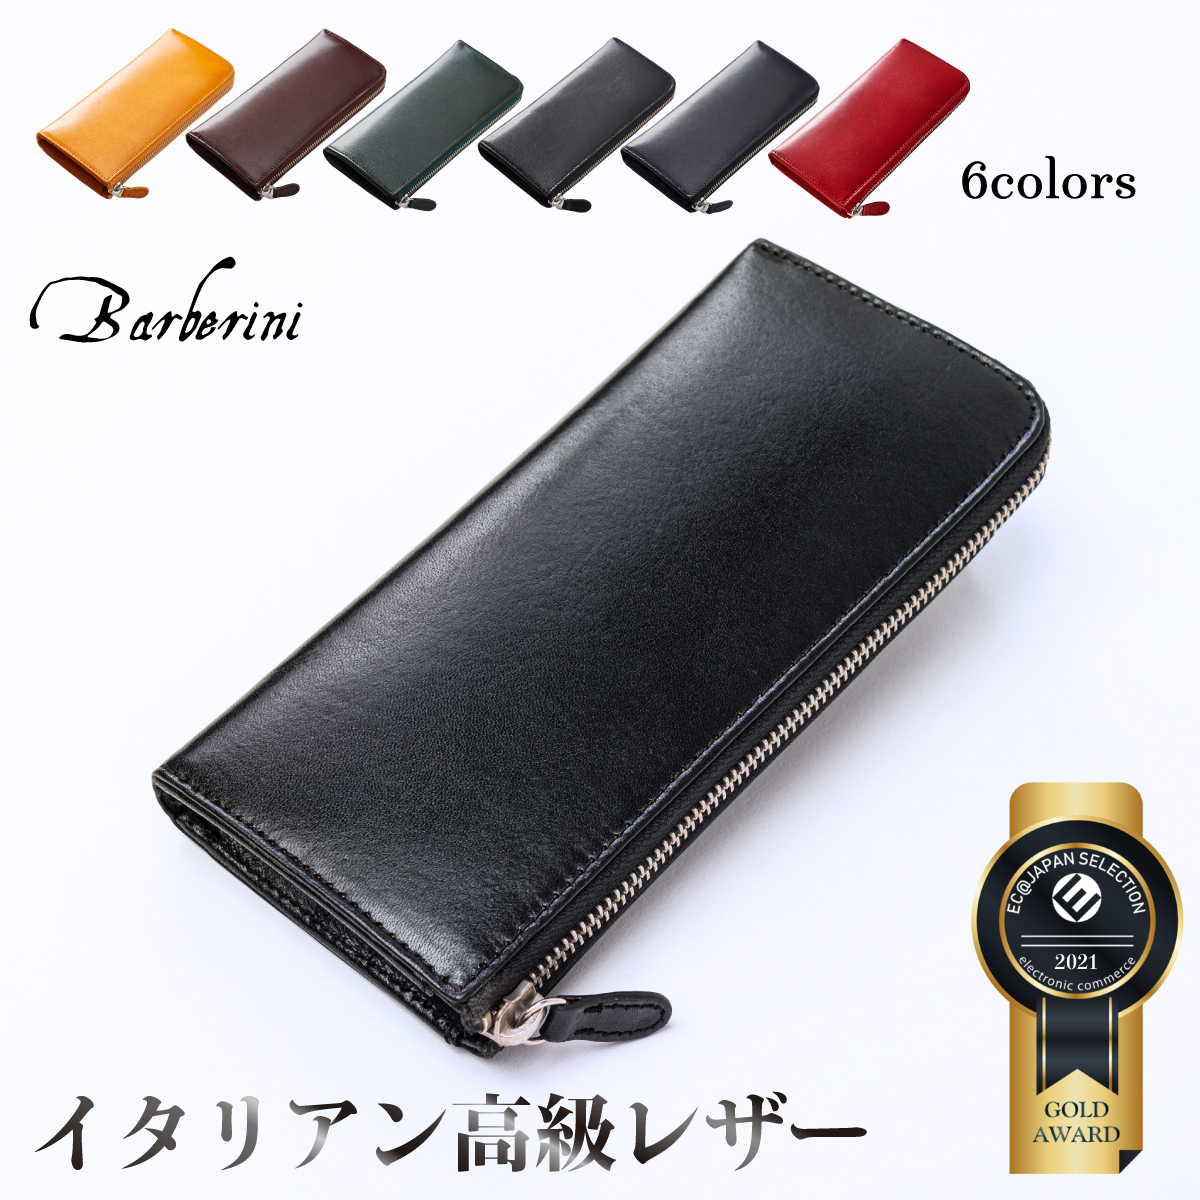  long wallet men's original leather purse lady's skimming prevention high capacity Barberini present gift name inserting possible 20 fee 30 fee 40 fee 50 fee 60 fee 